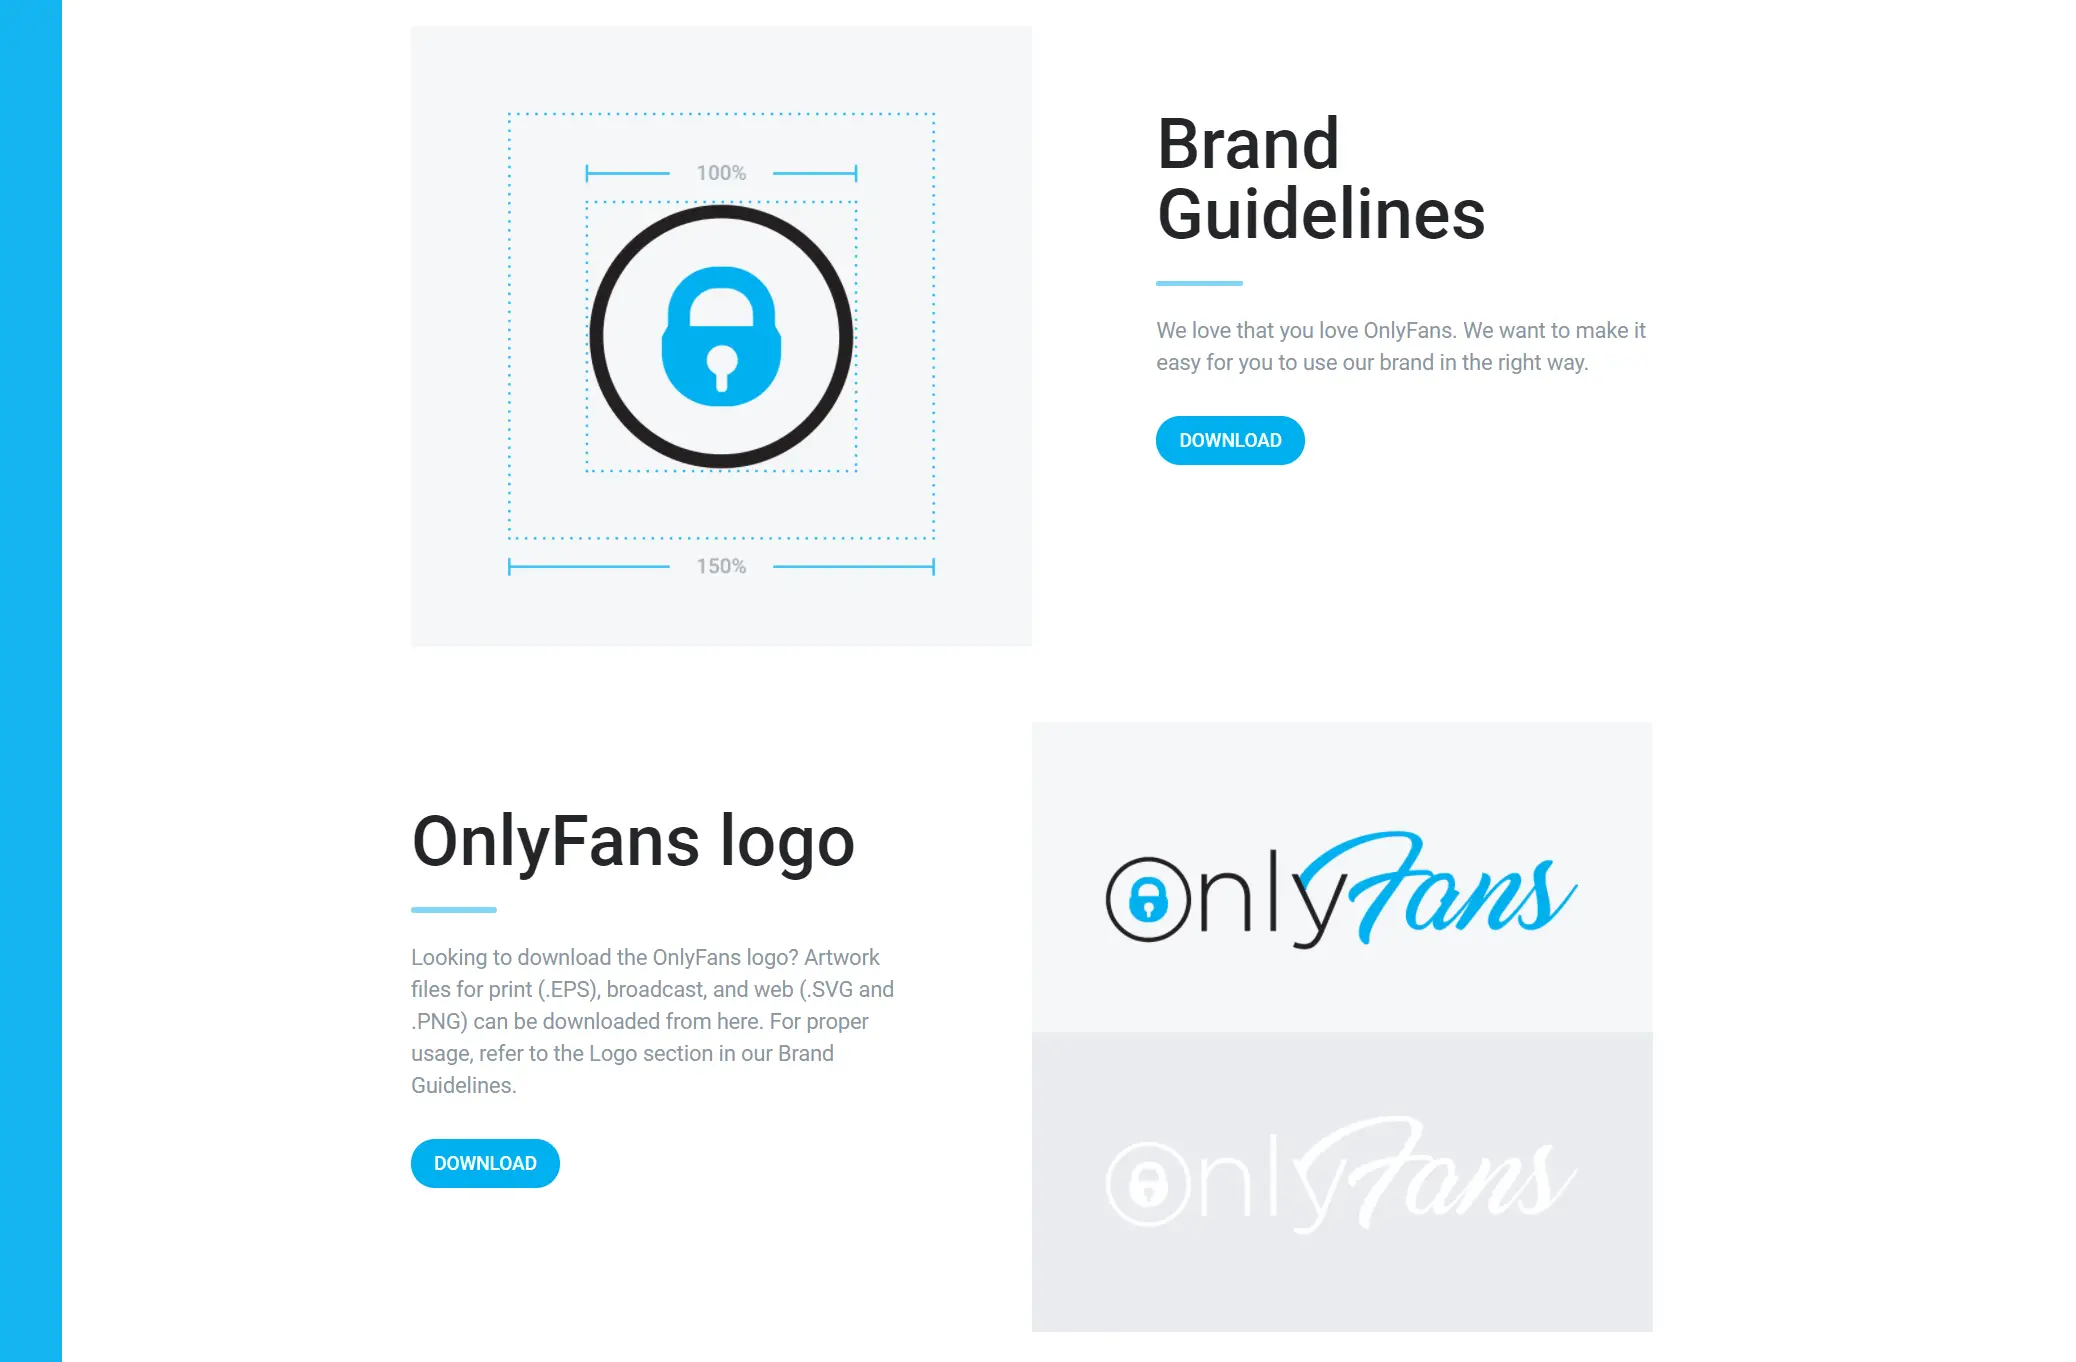 OnlyFans Brand Usage Guidelines